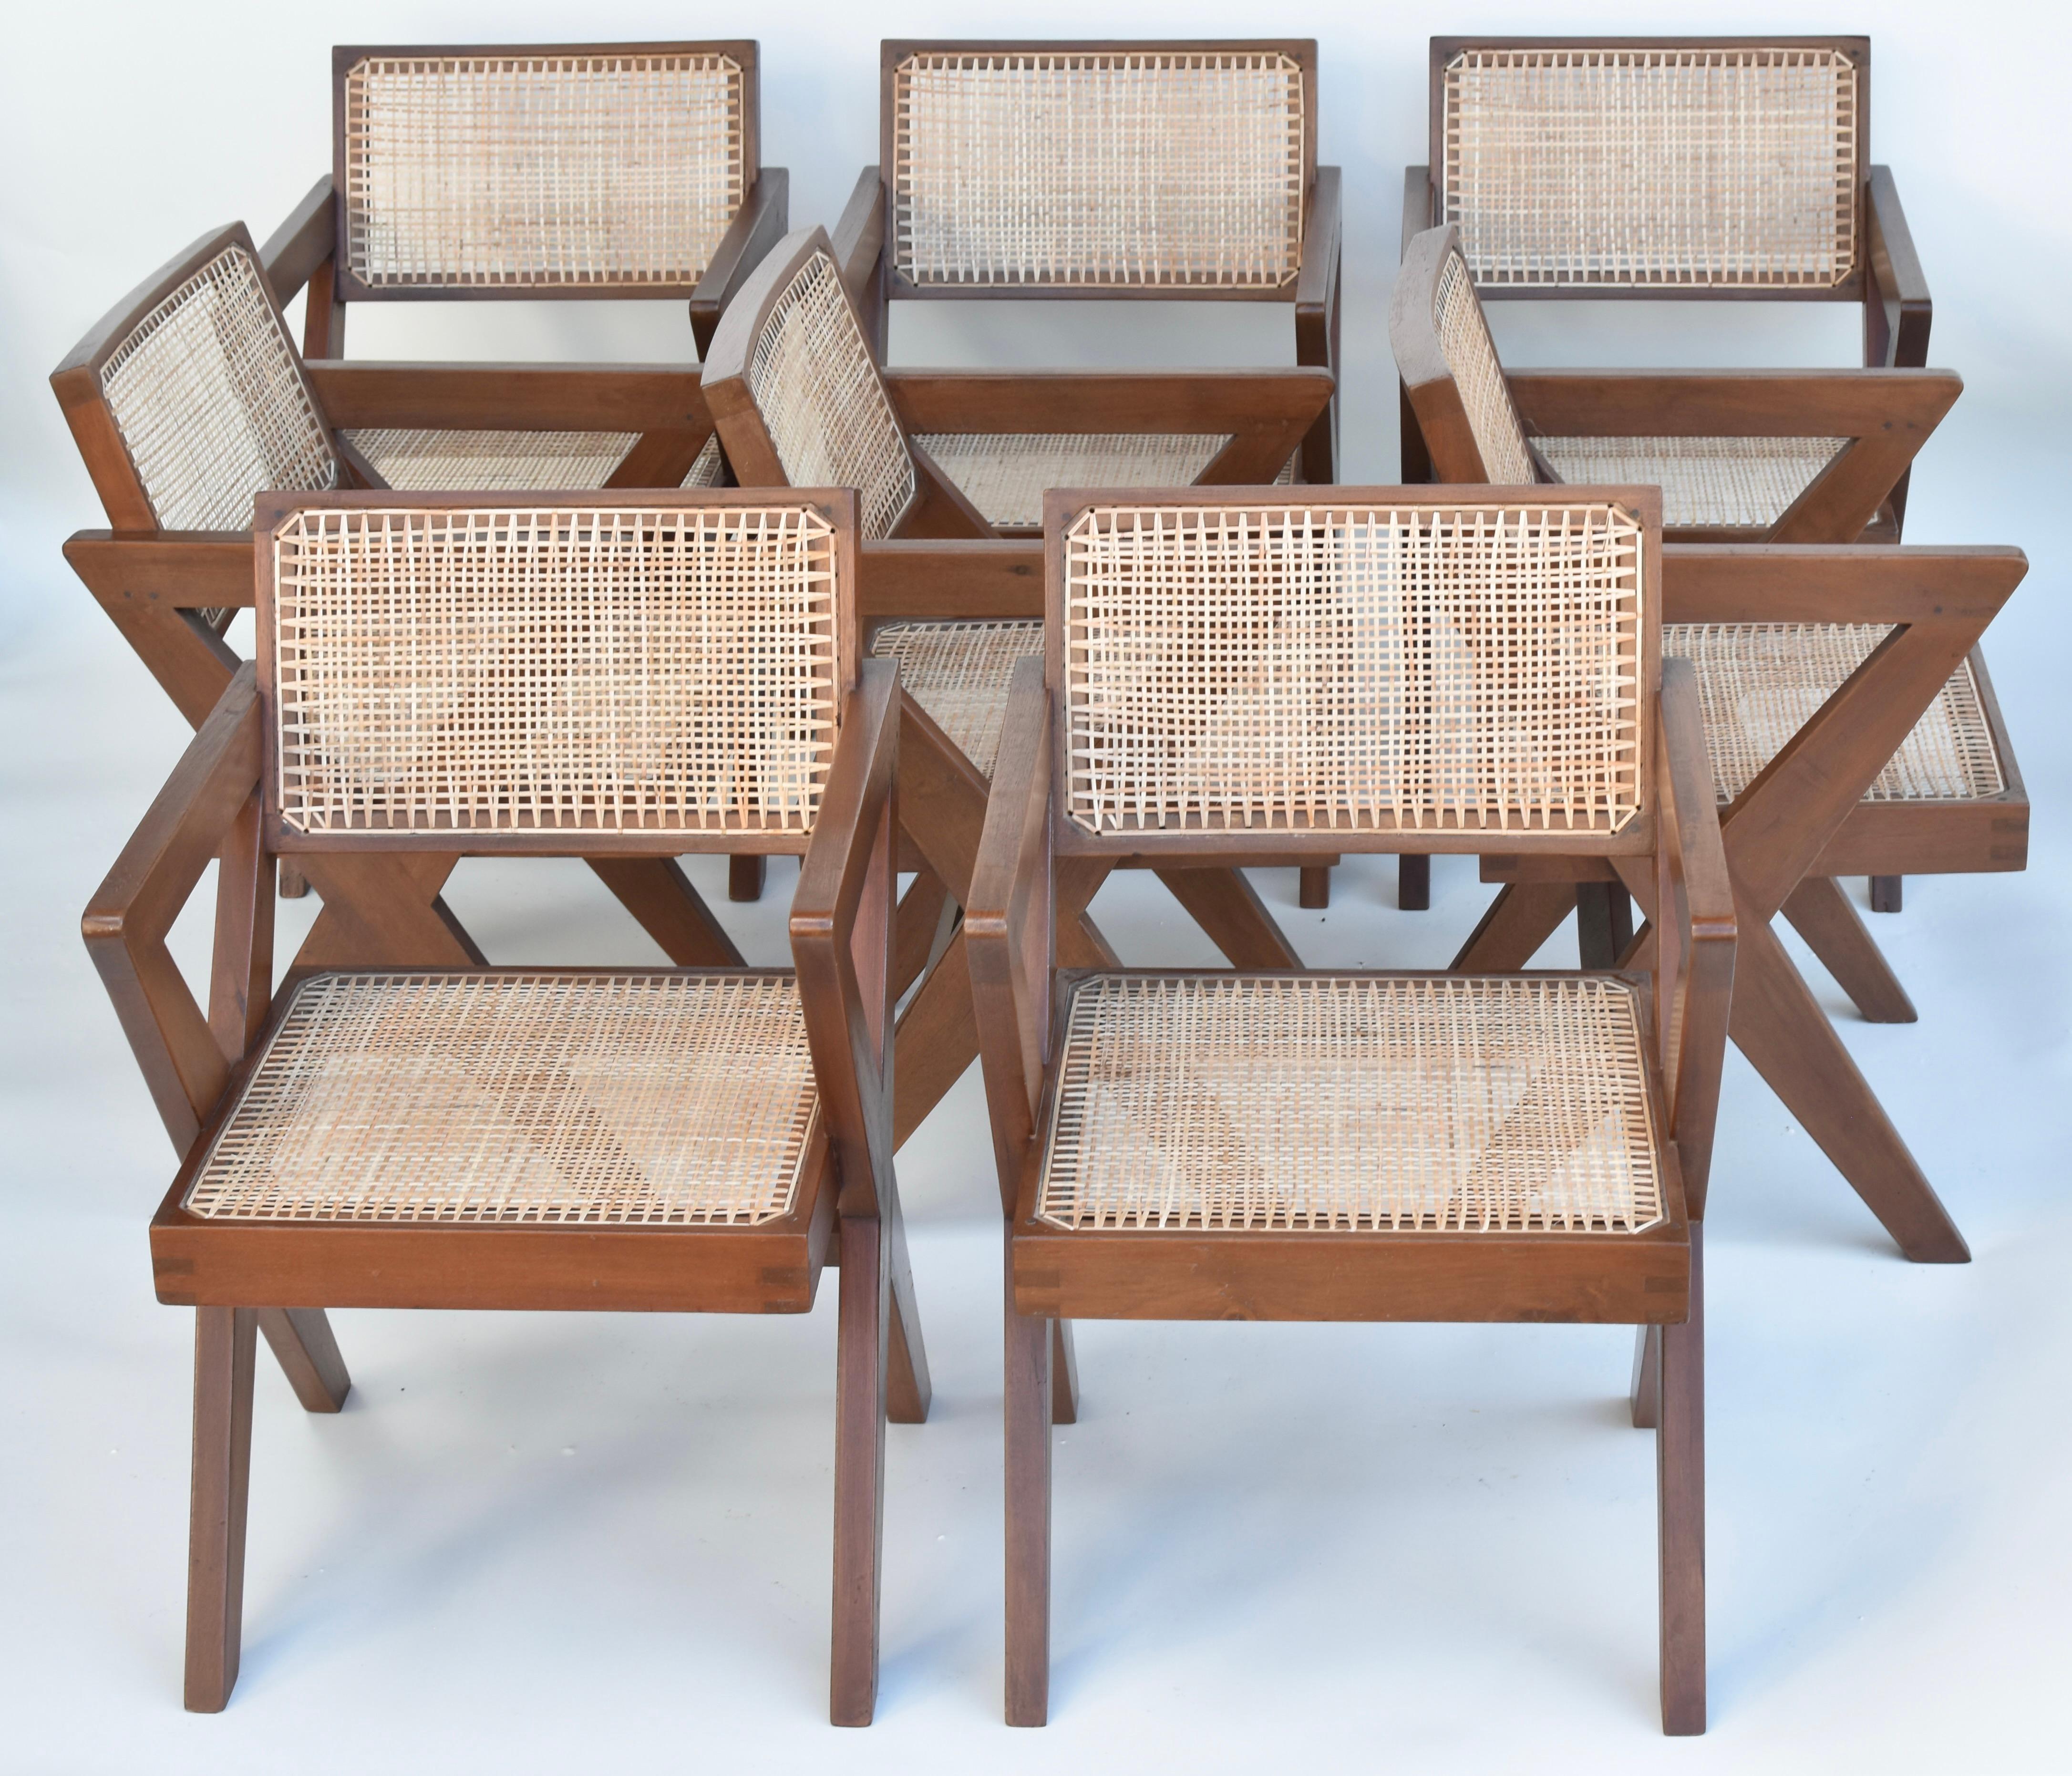 Pierre Jeanneret Set of 8 X-Leg Office Chairs Circa 1960s, Chandigarh For Sale 10